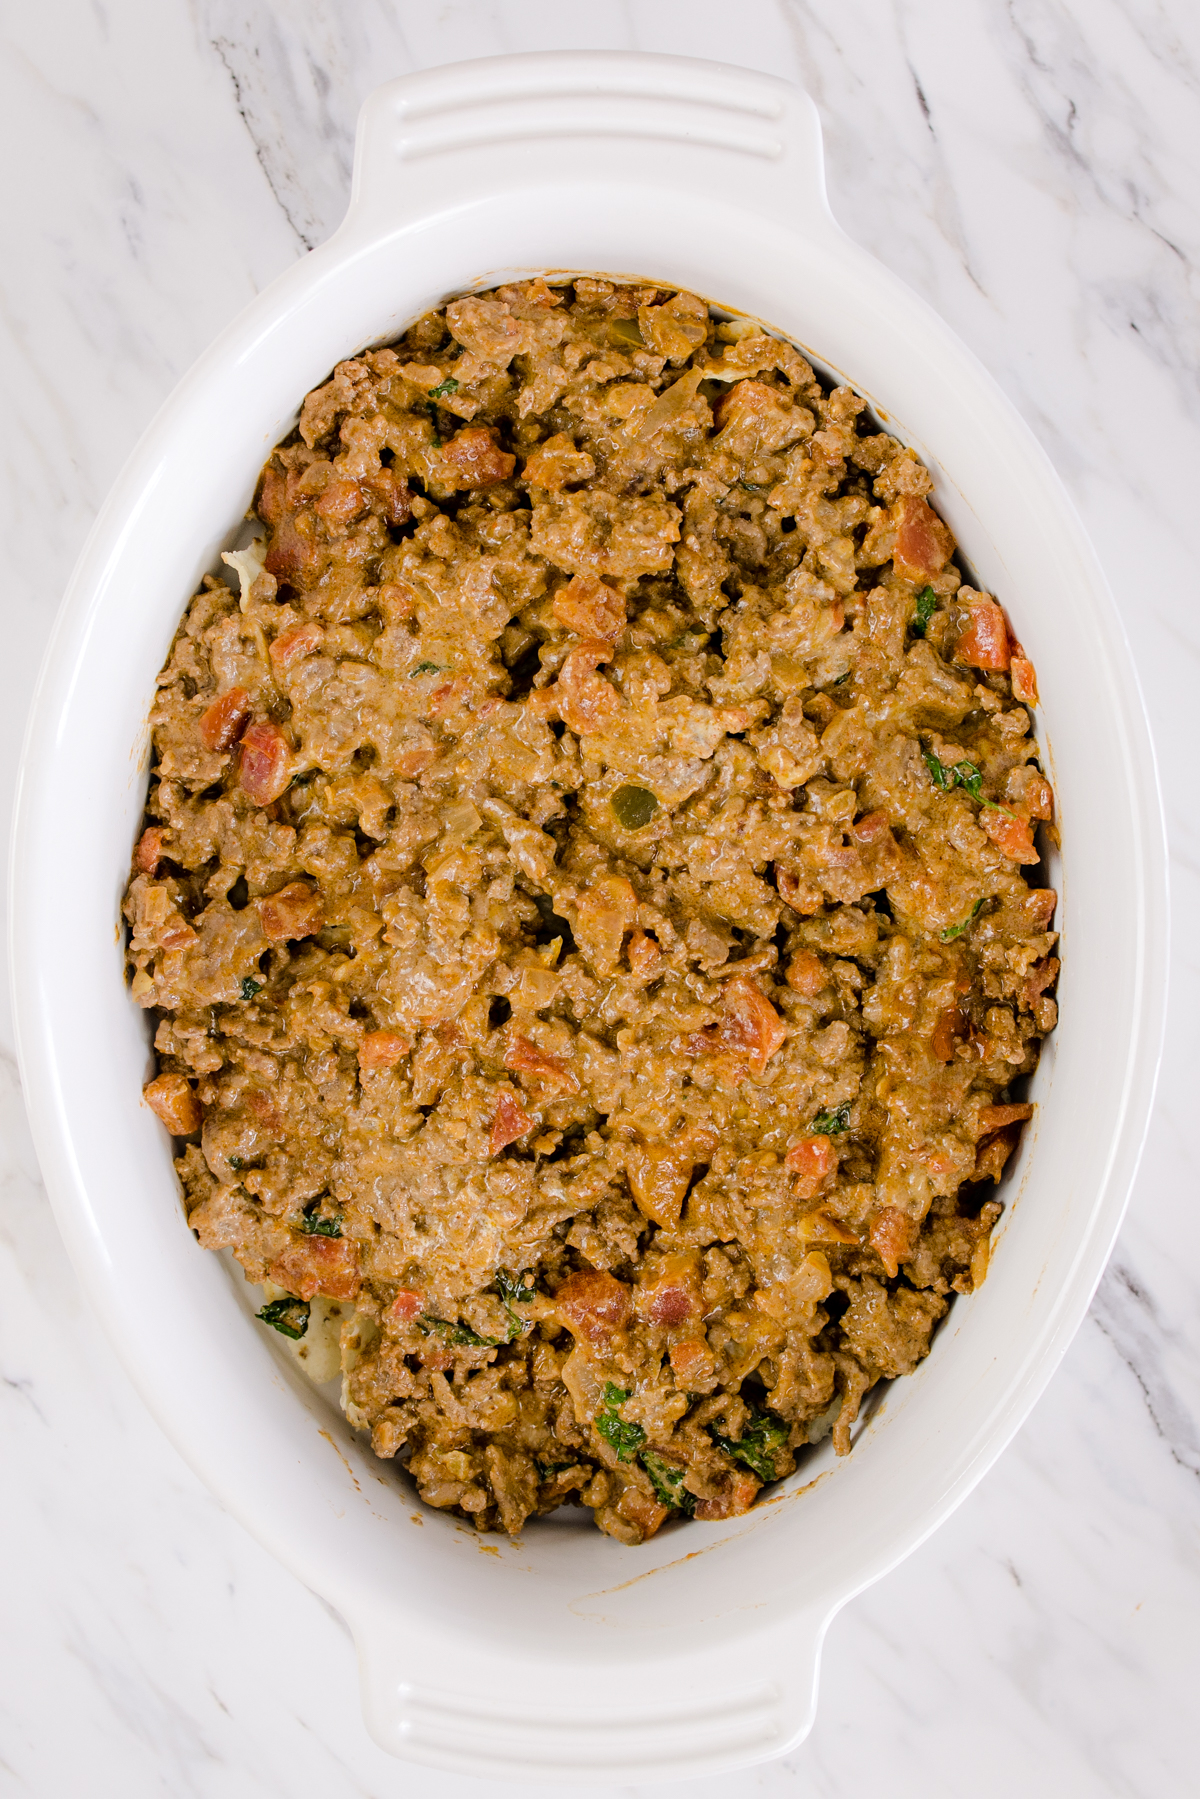 Top view of casserole dish with a layer of cooked ground beef on top. 